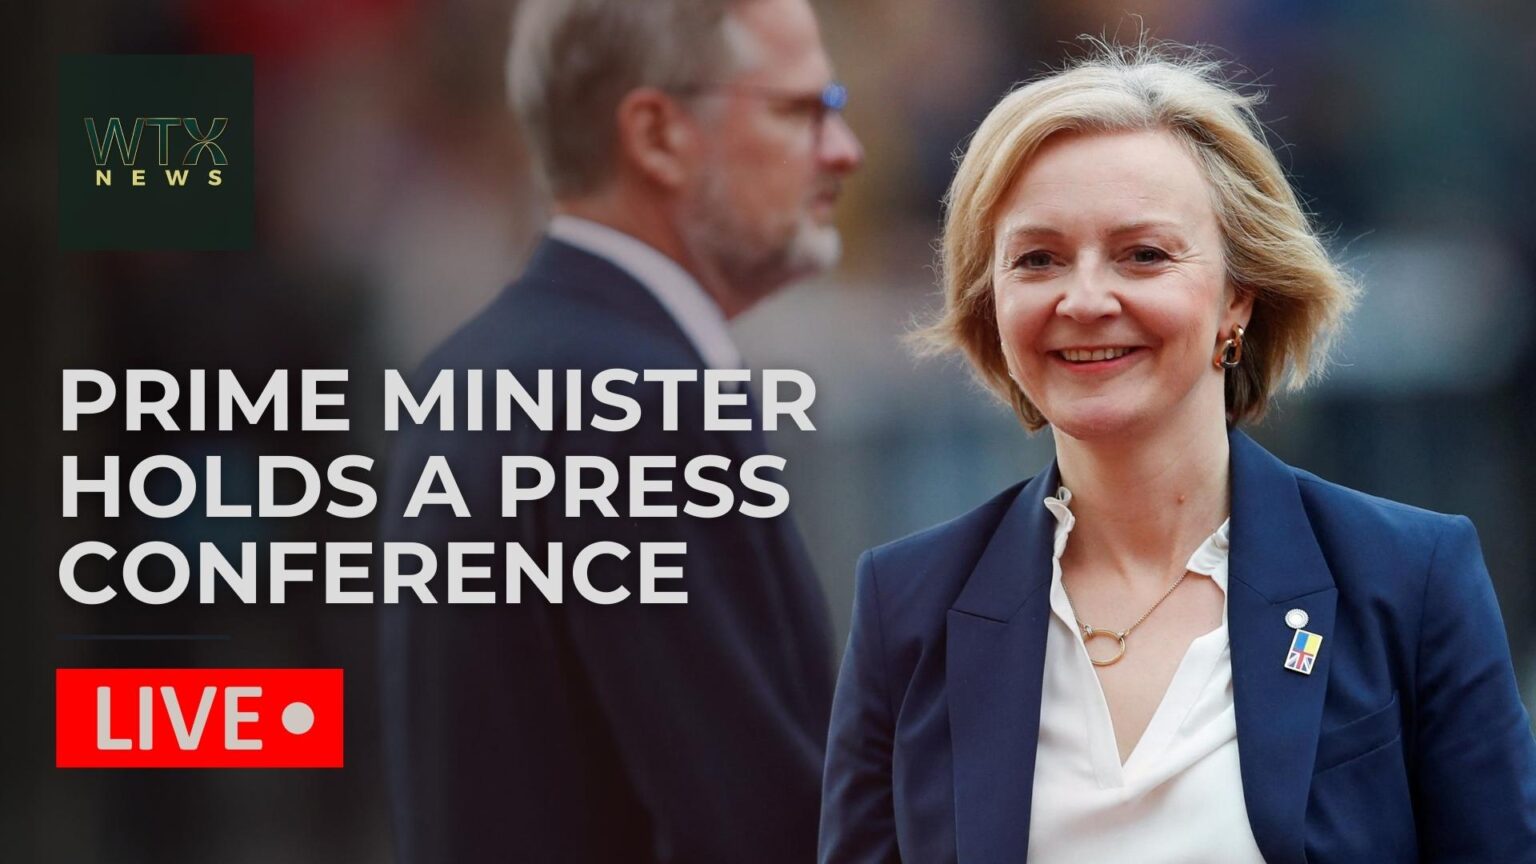 LIVE - PM press conference on mini-budget U-turn, chaos and crisis for Liz Truss and the markets